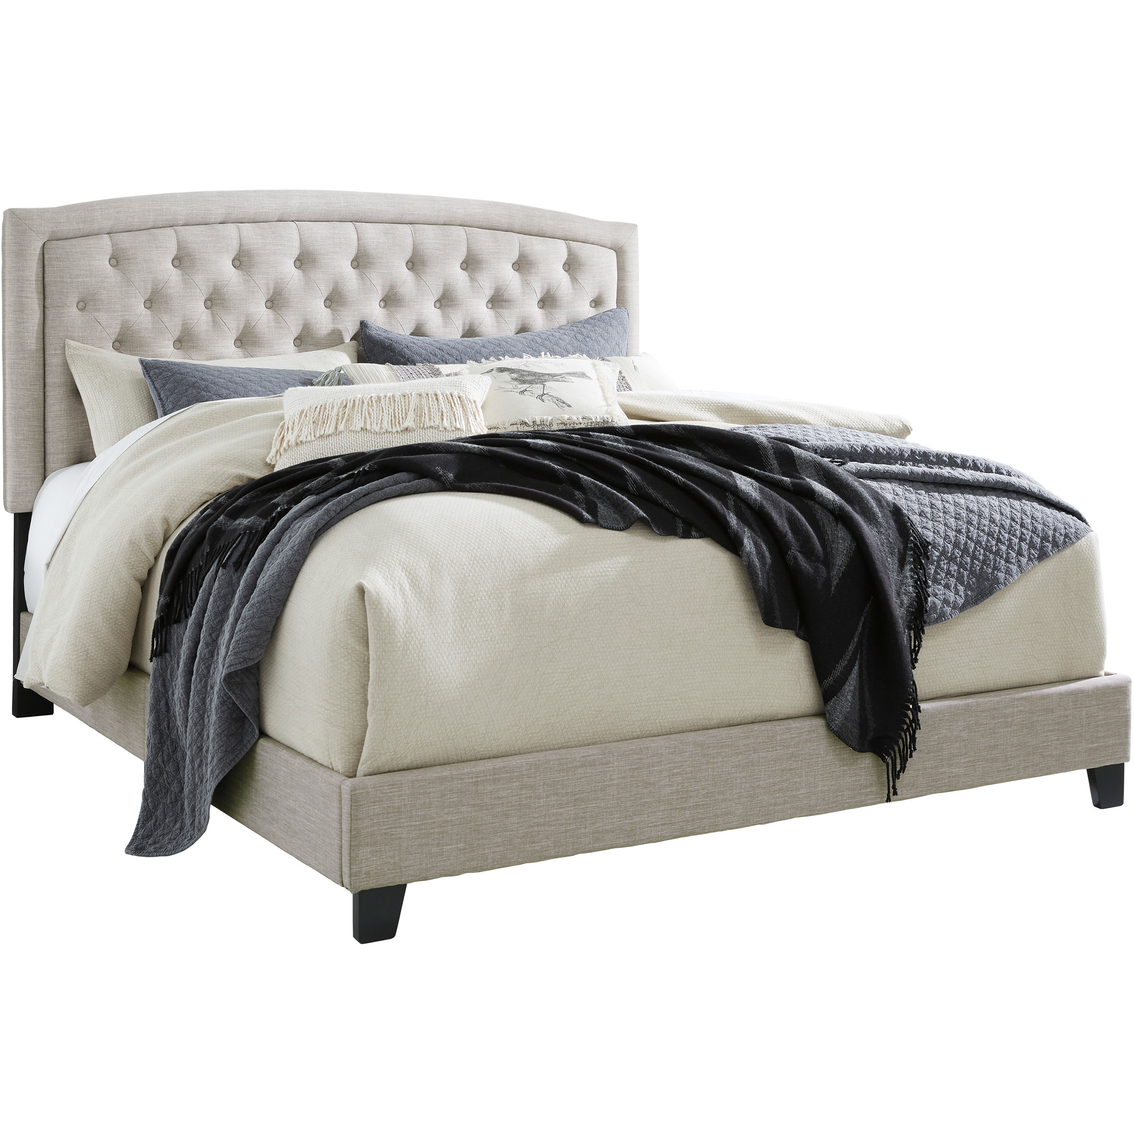 Signature Design By Ashley Jerary Upholstered Bed With Arched Tufted Headboard Beds Furniture Appliances Shop The Exchange